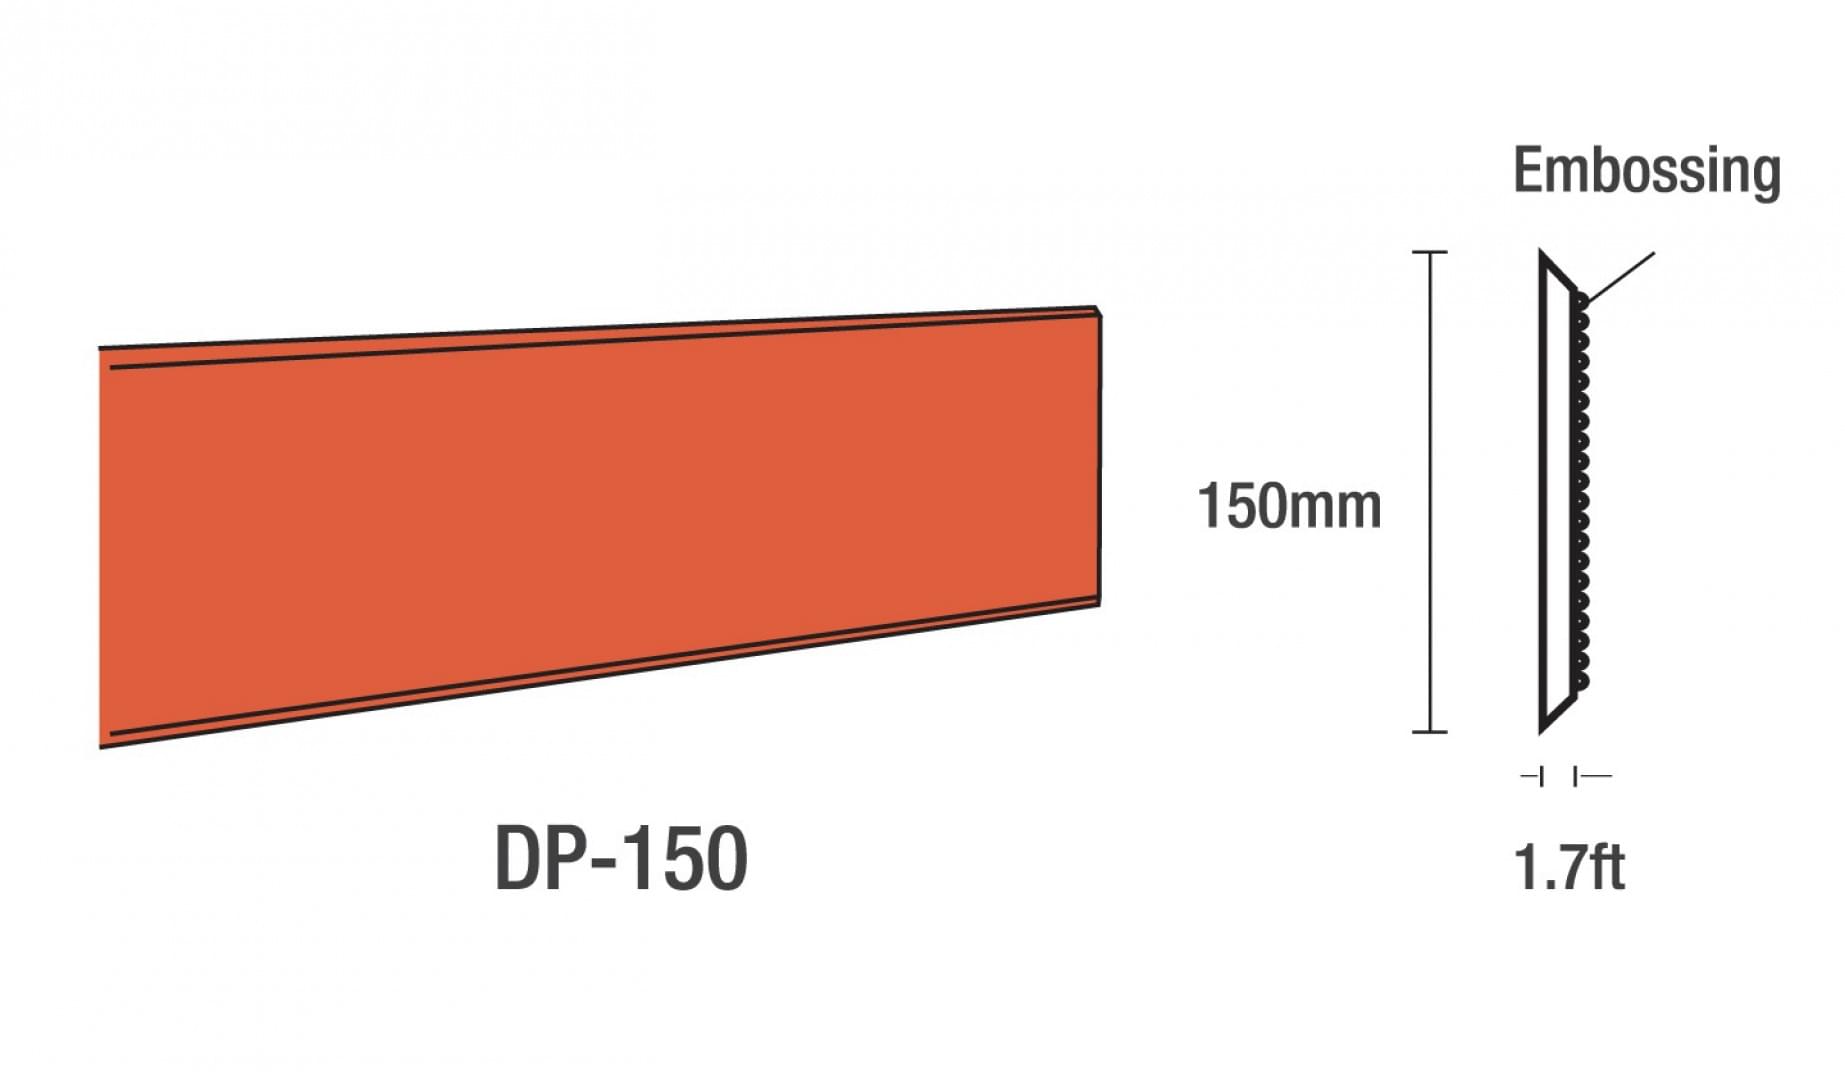 DP-150 (h:150mm w: 1.7ft) from Haema